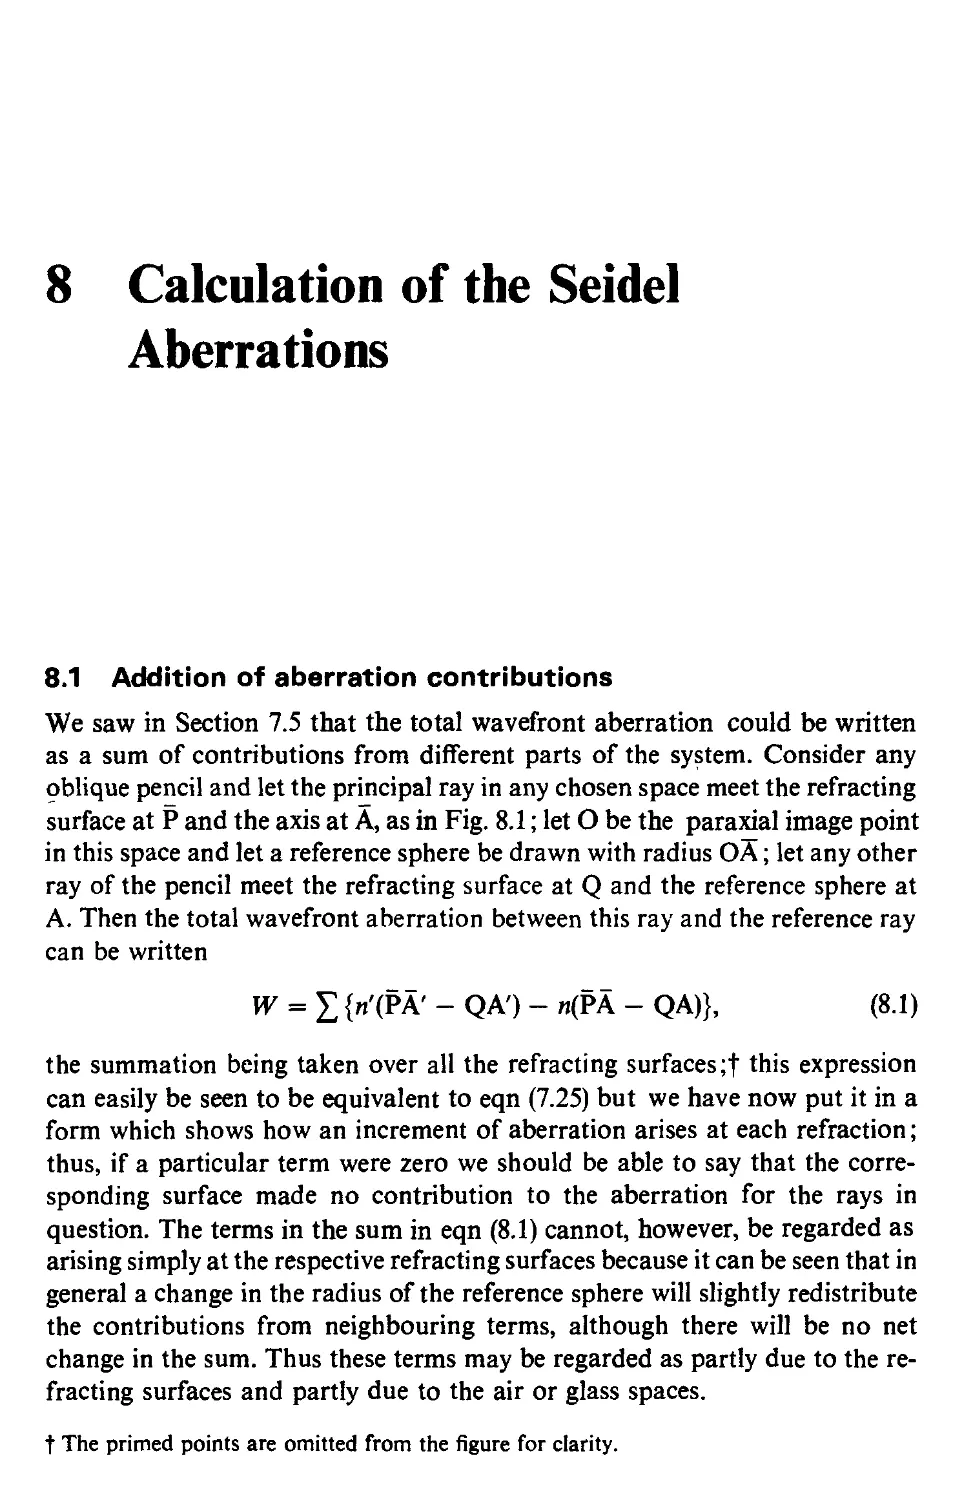 8 Calculation of the Seidel aberrations